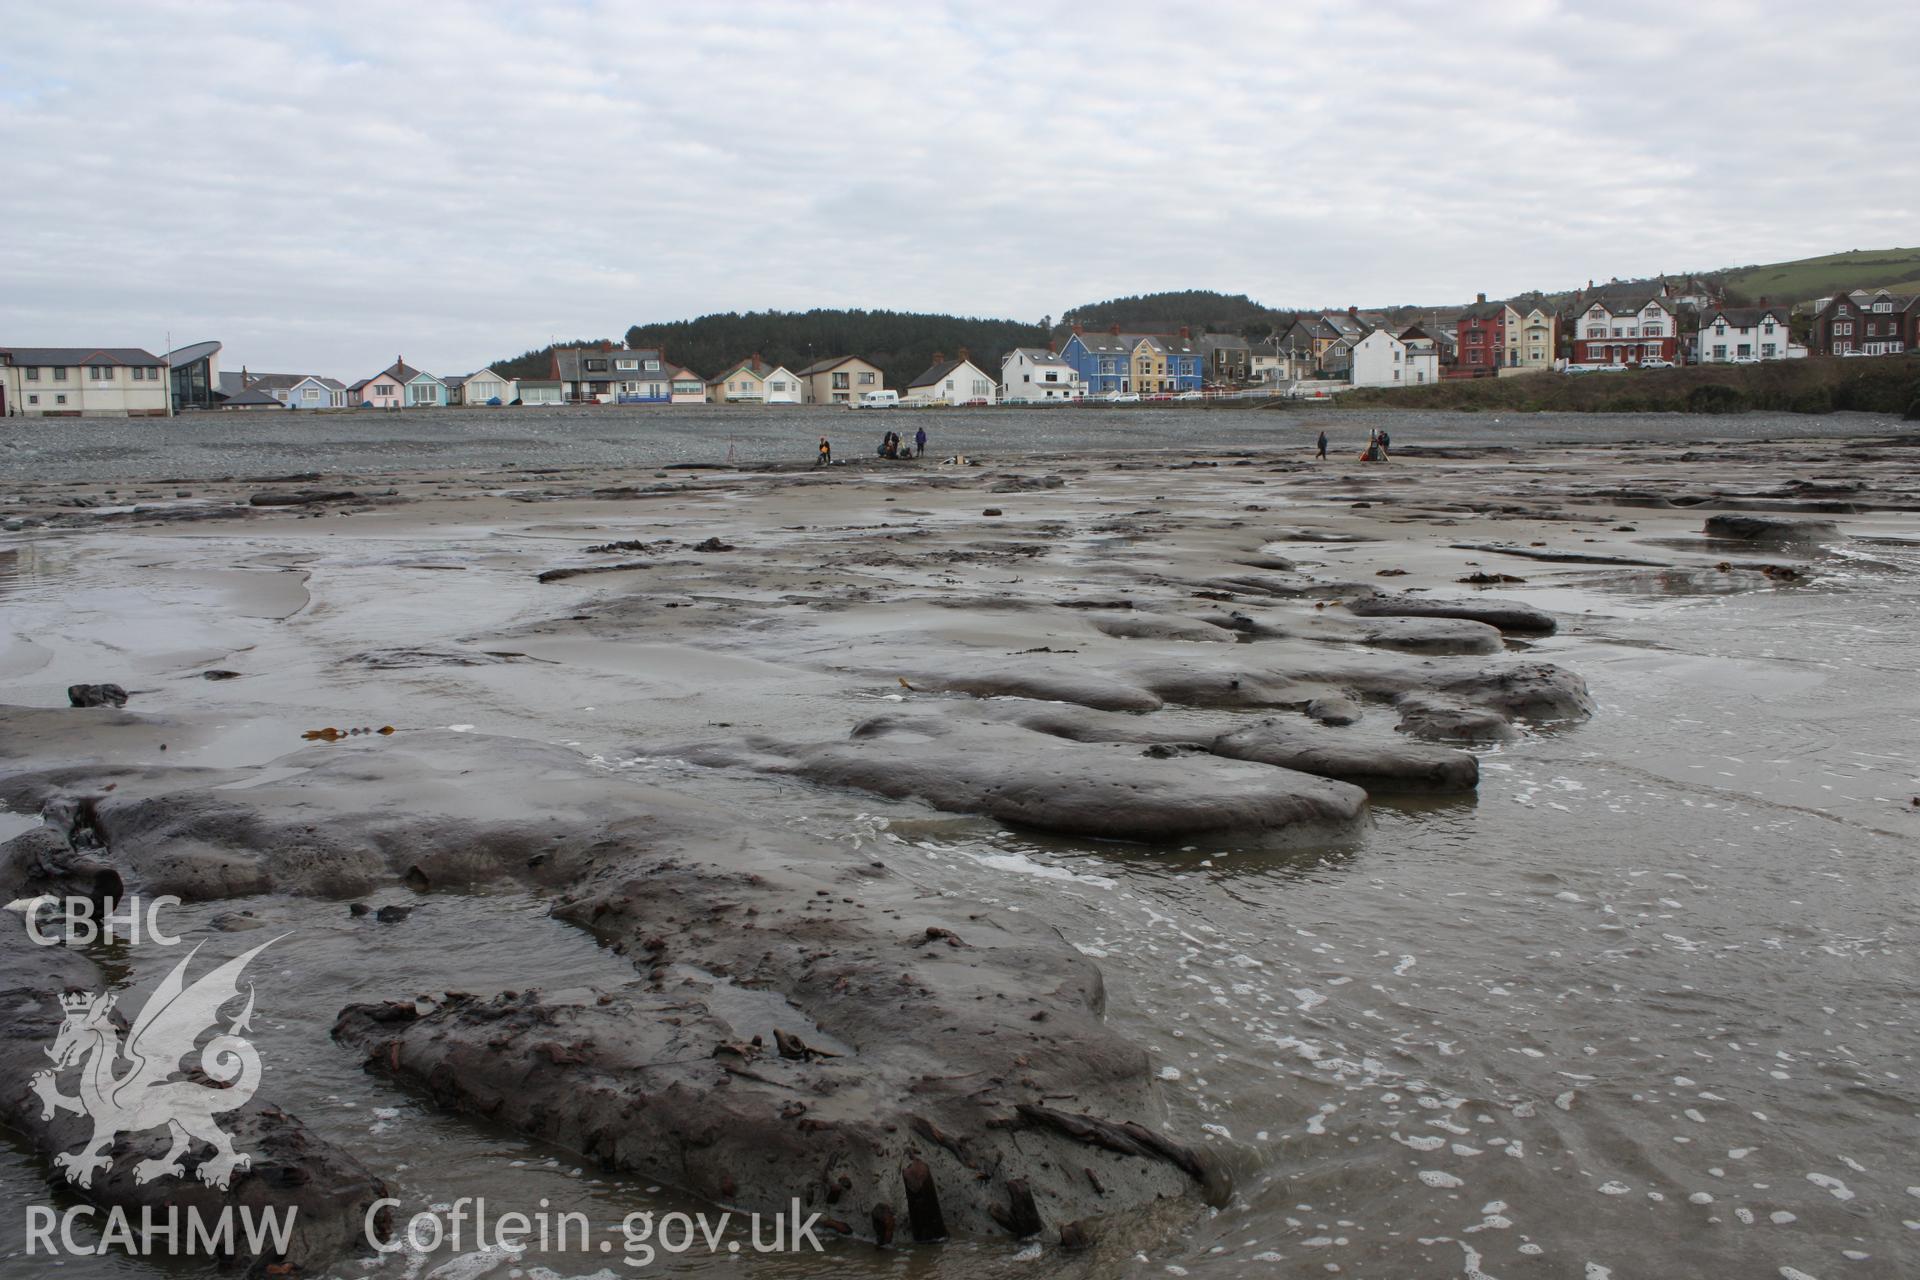 Borth submerged forest (between RNLI lifeboat station and upper Borth), looking southeast towards High Street and Clarach road. Showing western extent of peat exposures at low tide.